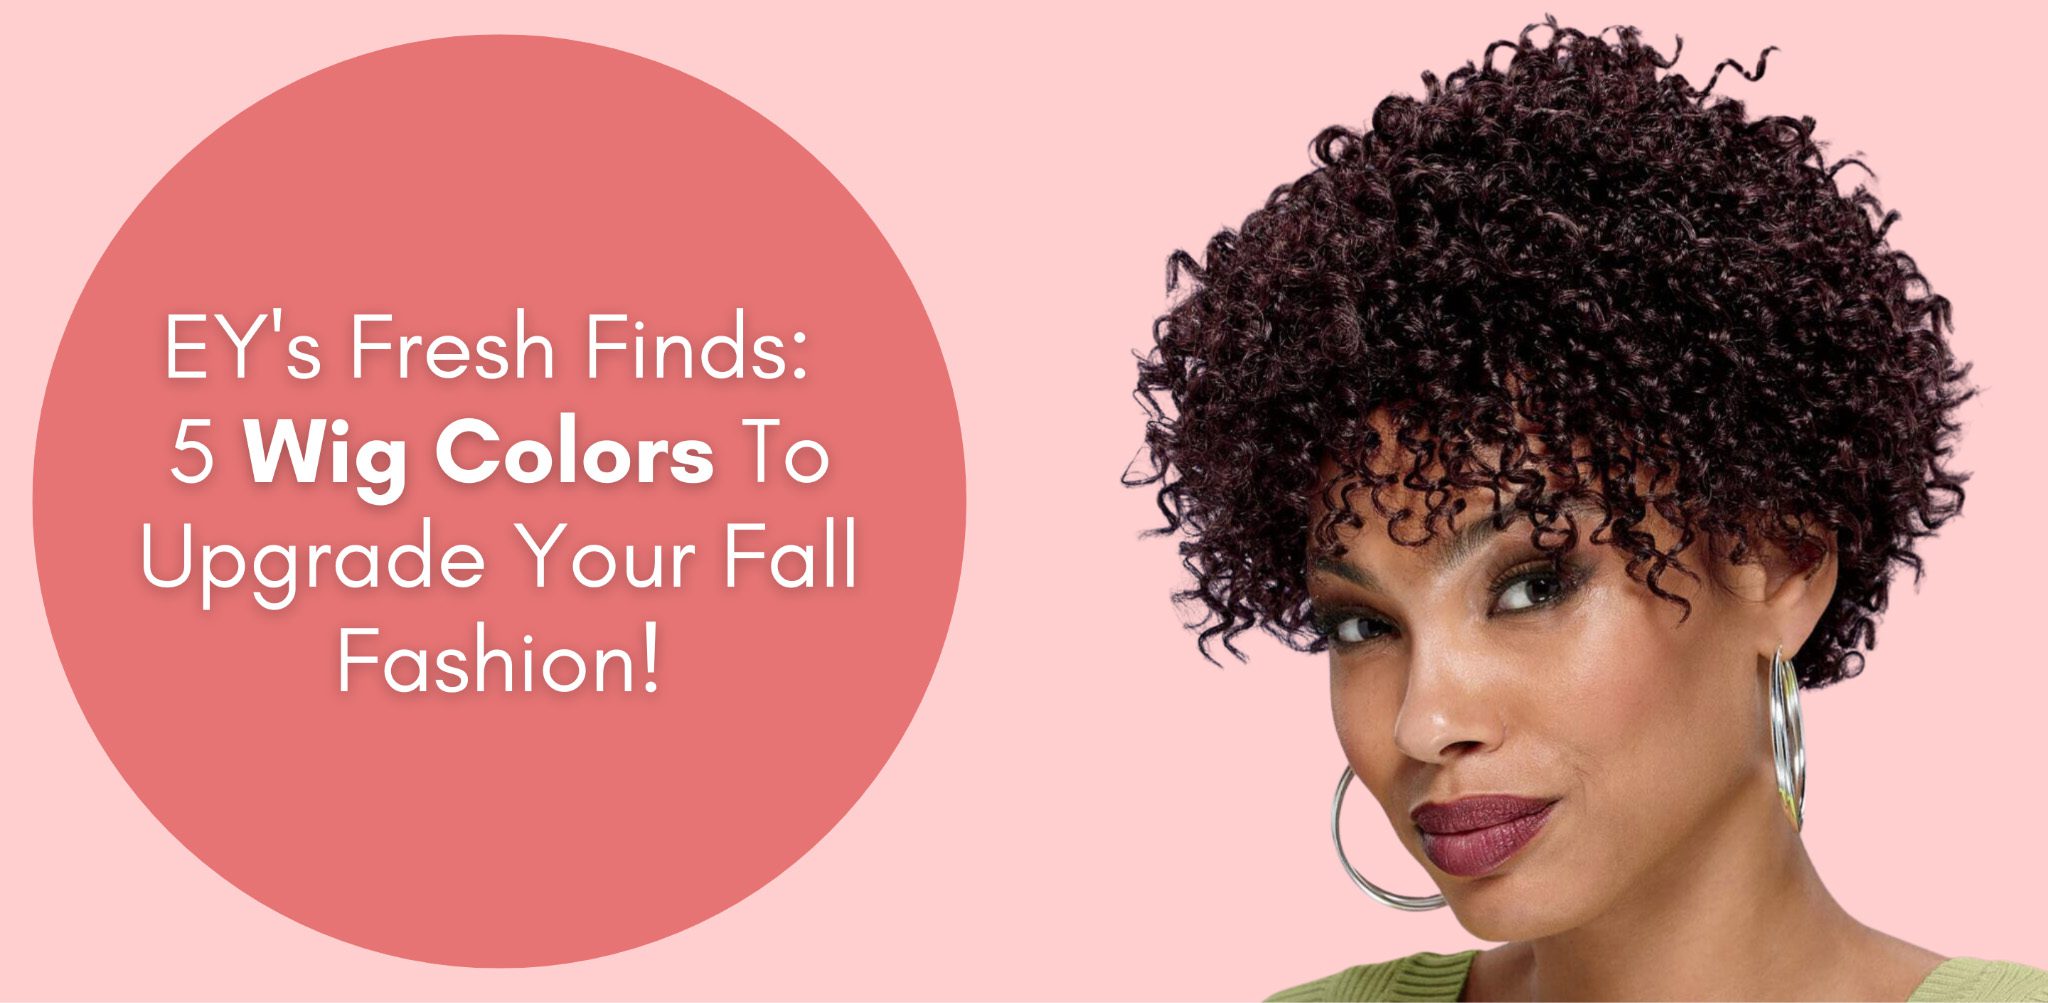 EY’s Fresh Finds: 5 Wig Colors To Upgrade Your Fall Fashion!